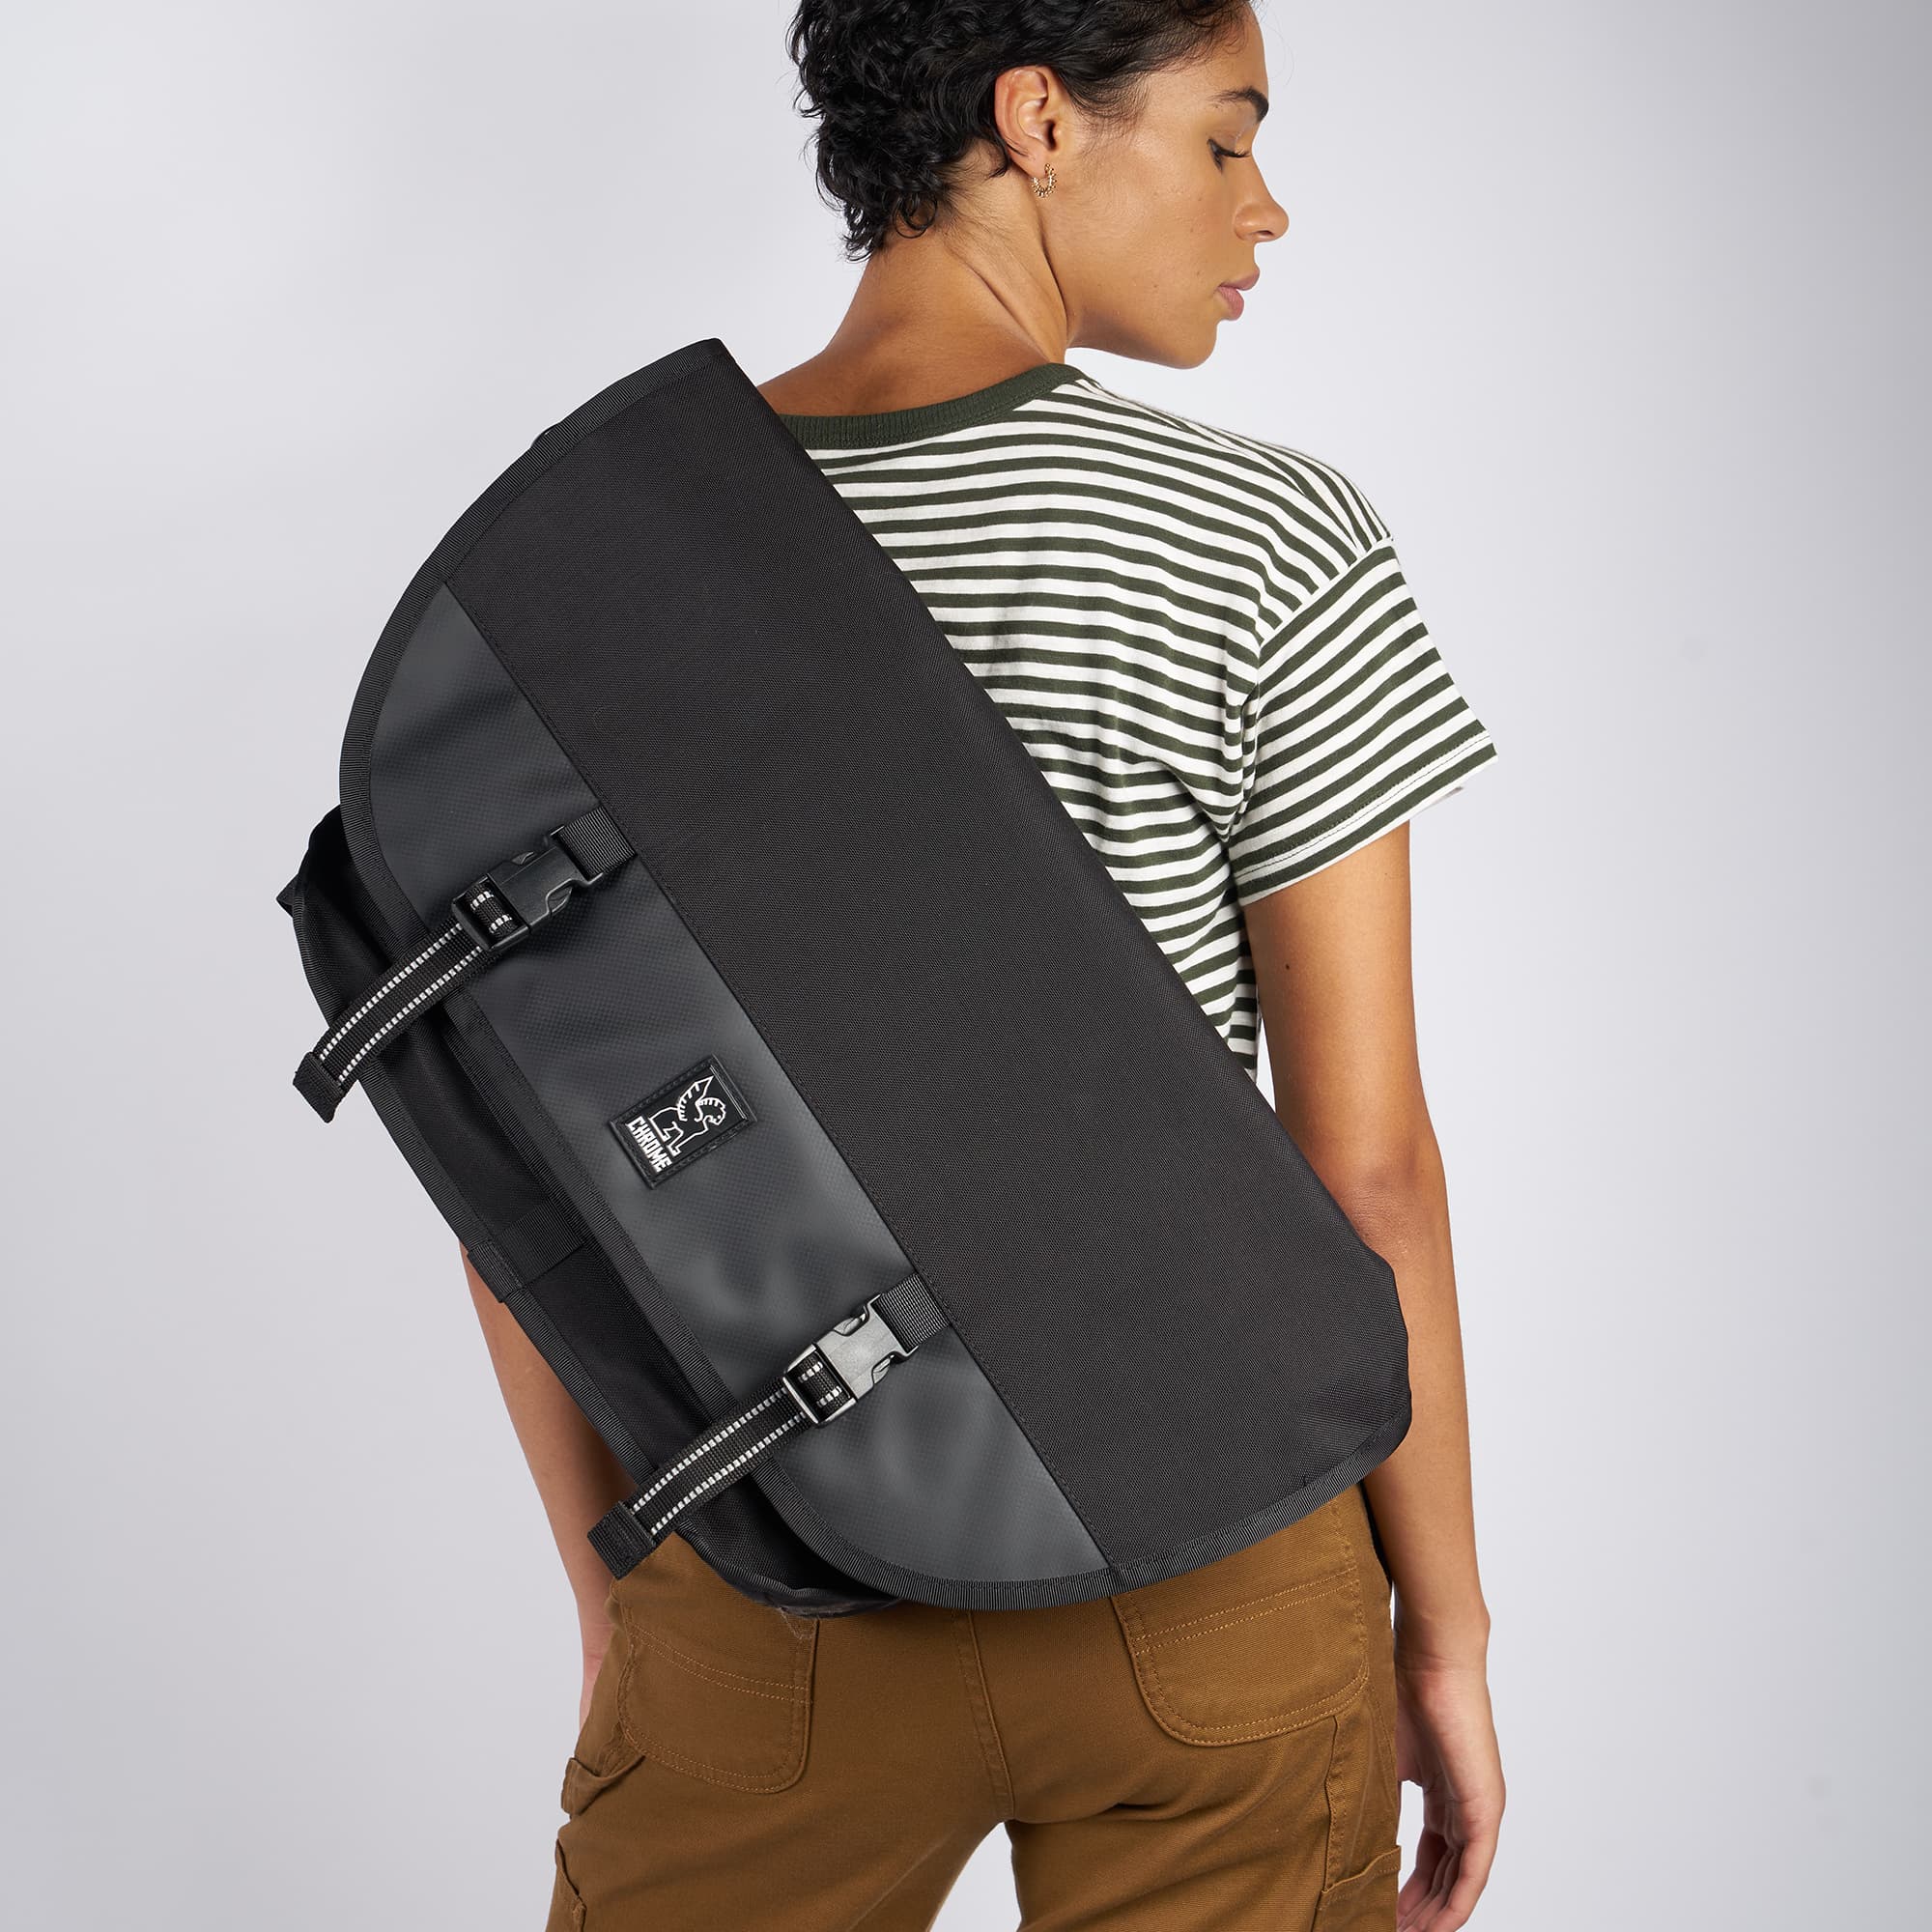 24L Citizen Messenger in black, back view on a woman